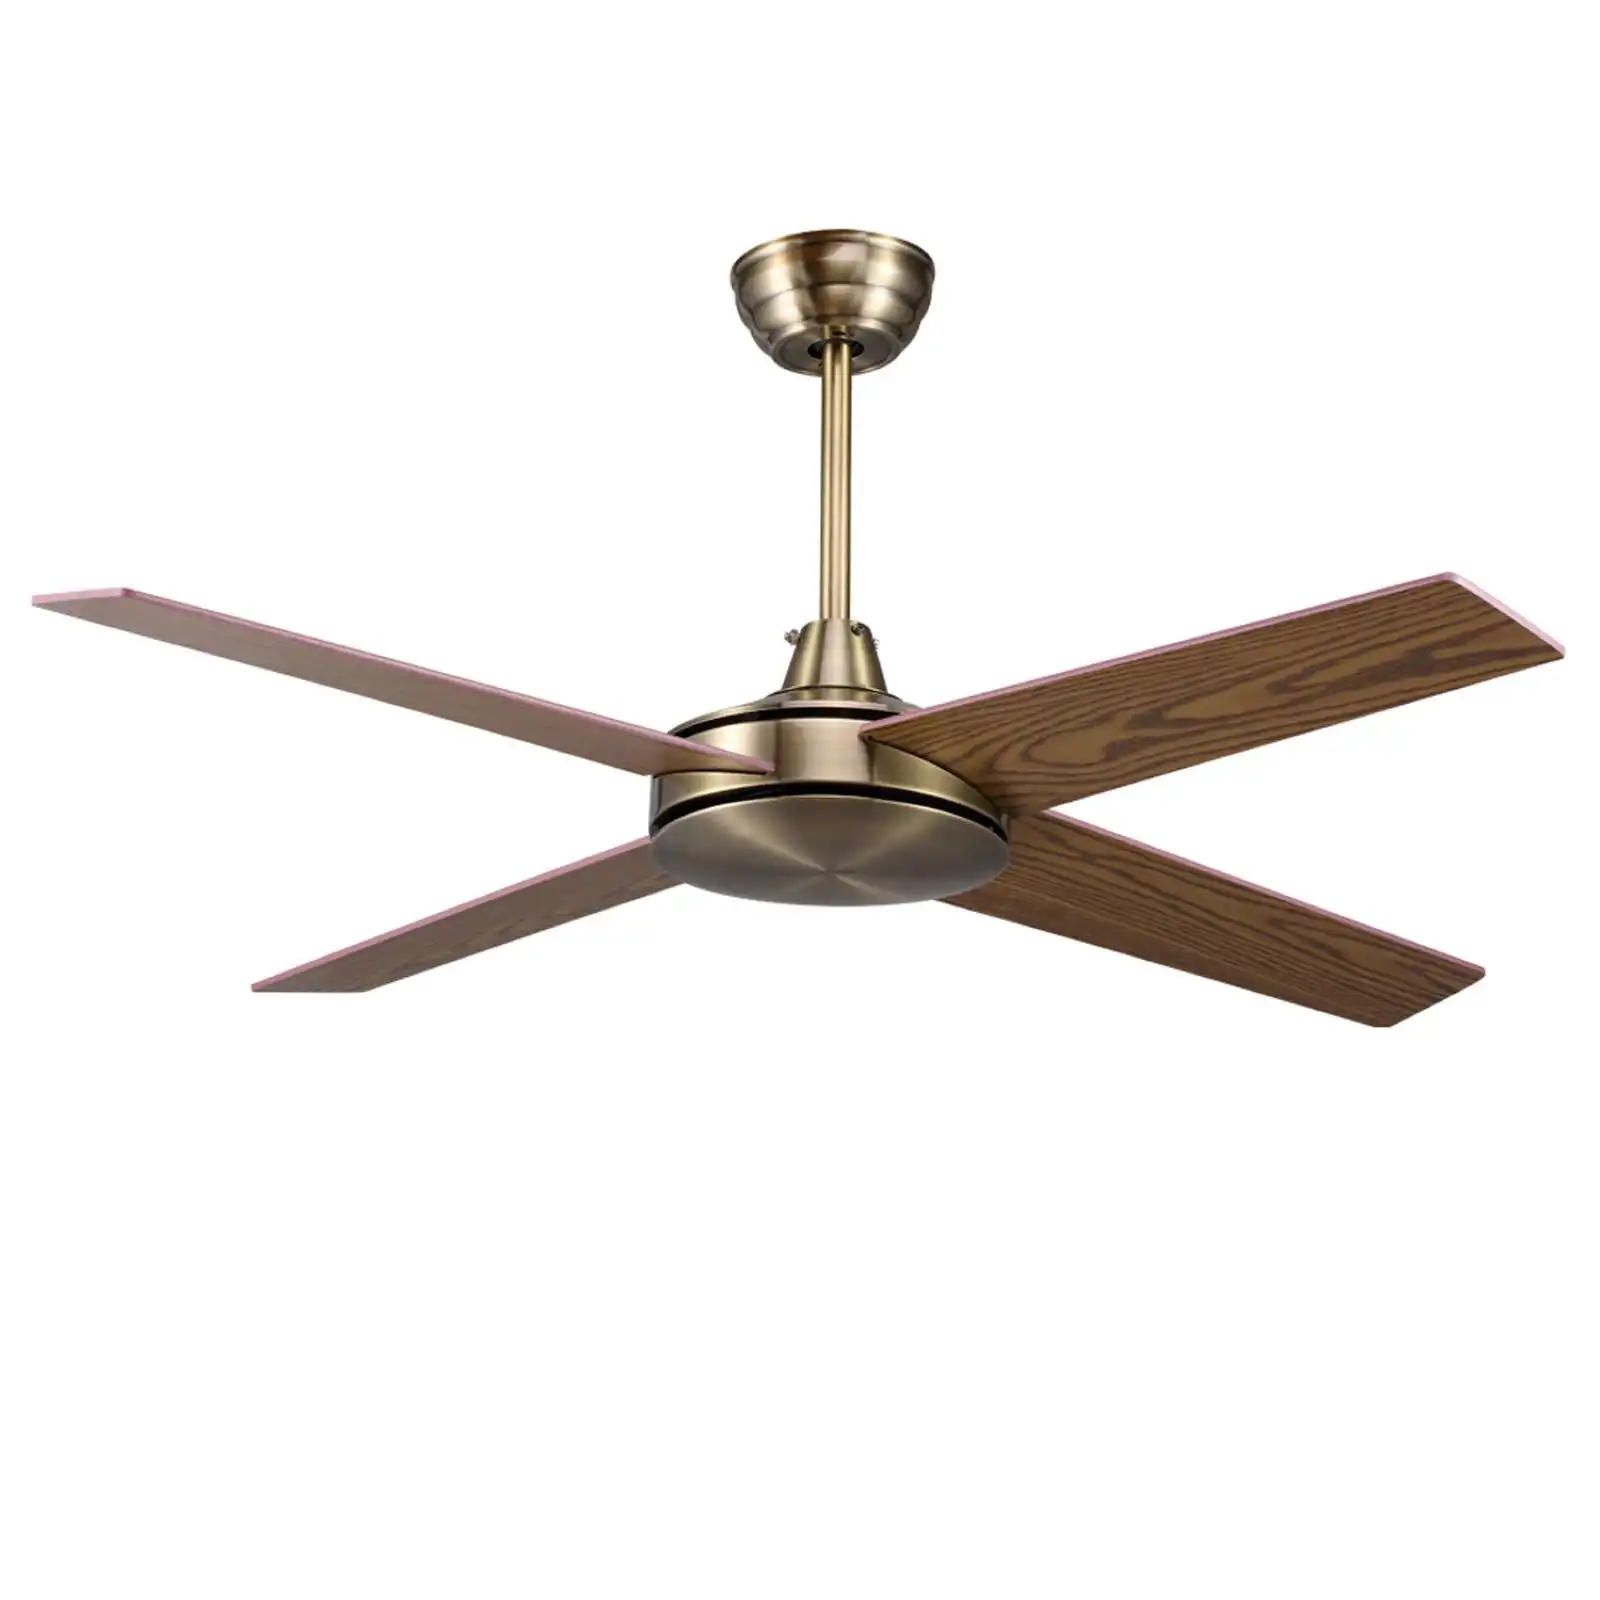 Viviendo 52 Inch 4 Blade Ceiling Fan with 3 Speed Remote Control - Brown